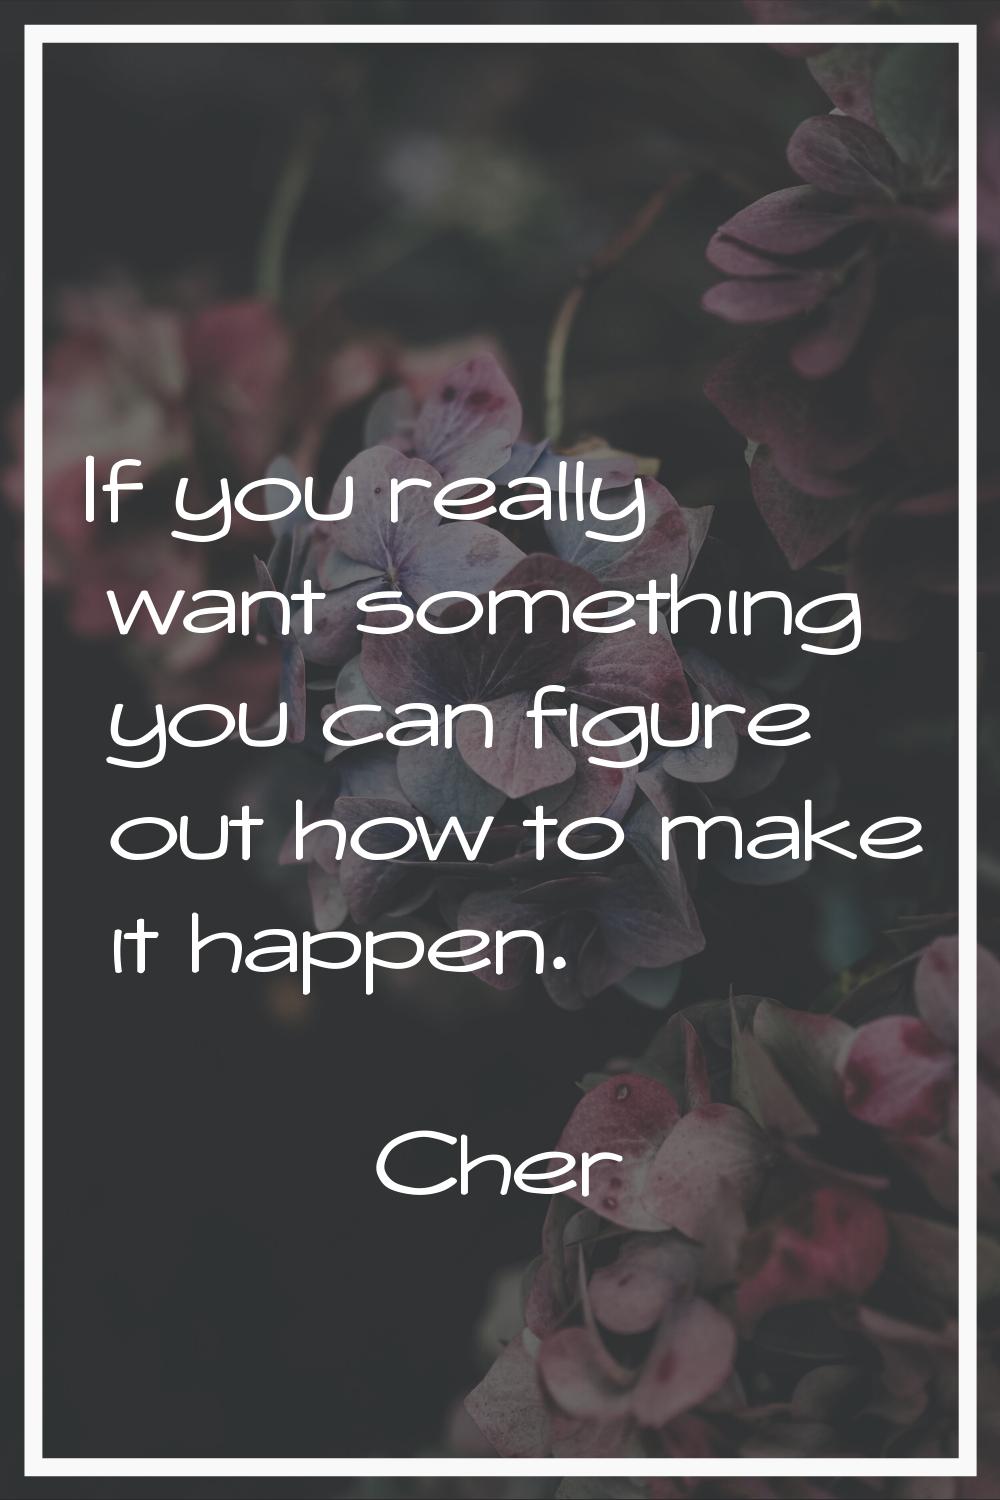 If you really want something you can figure out how to make it happen.